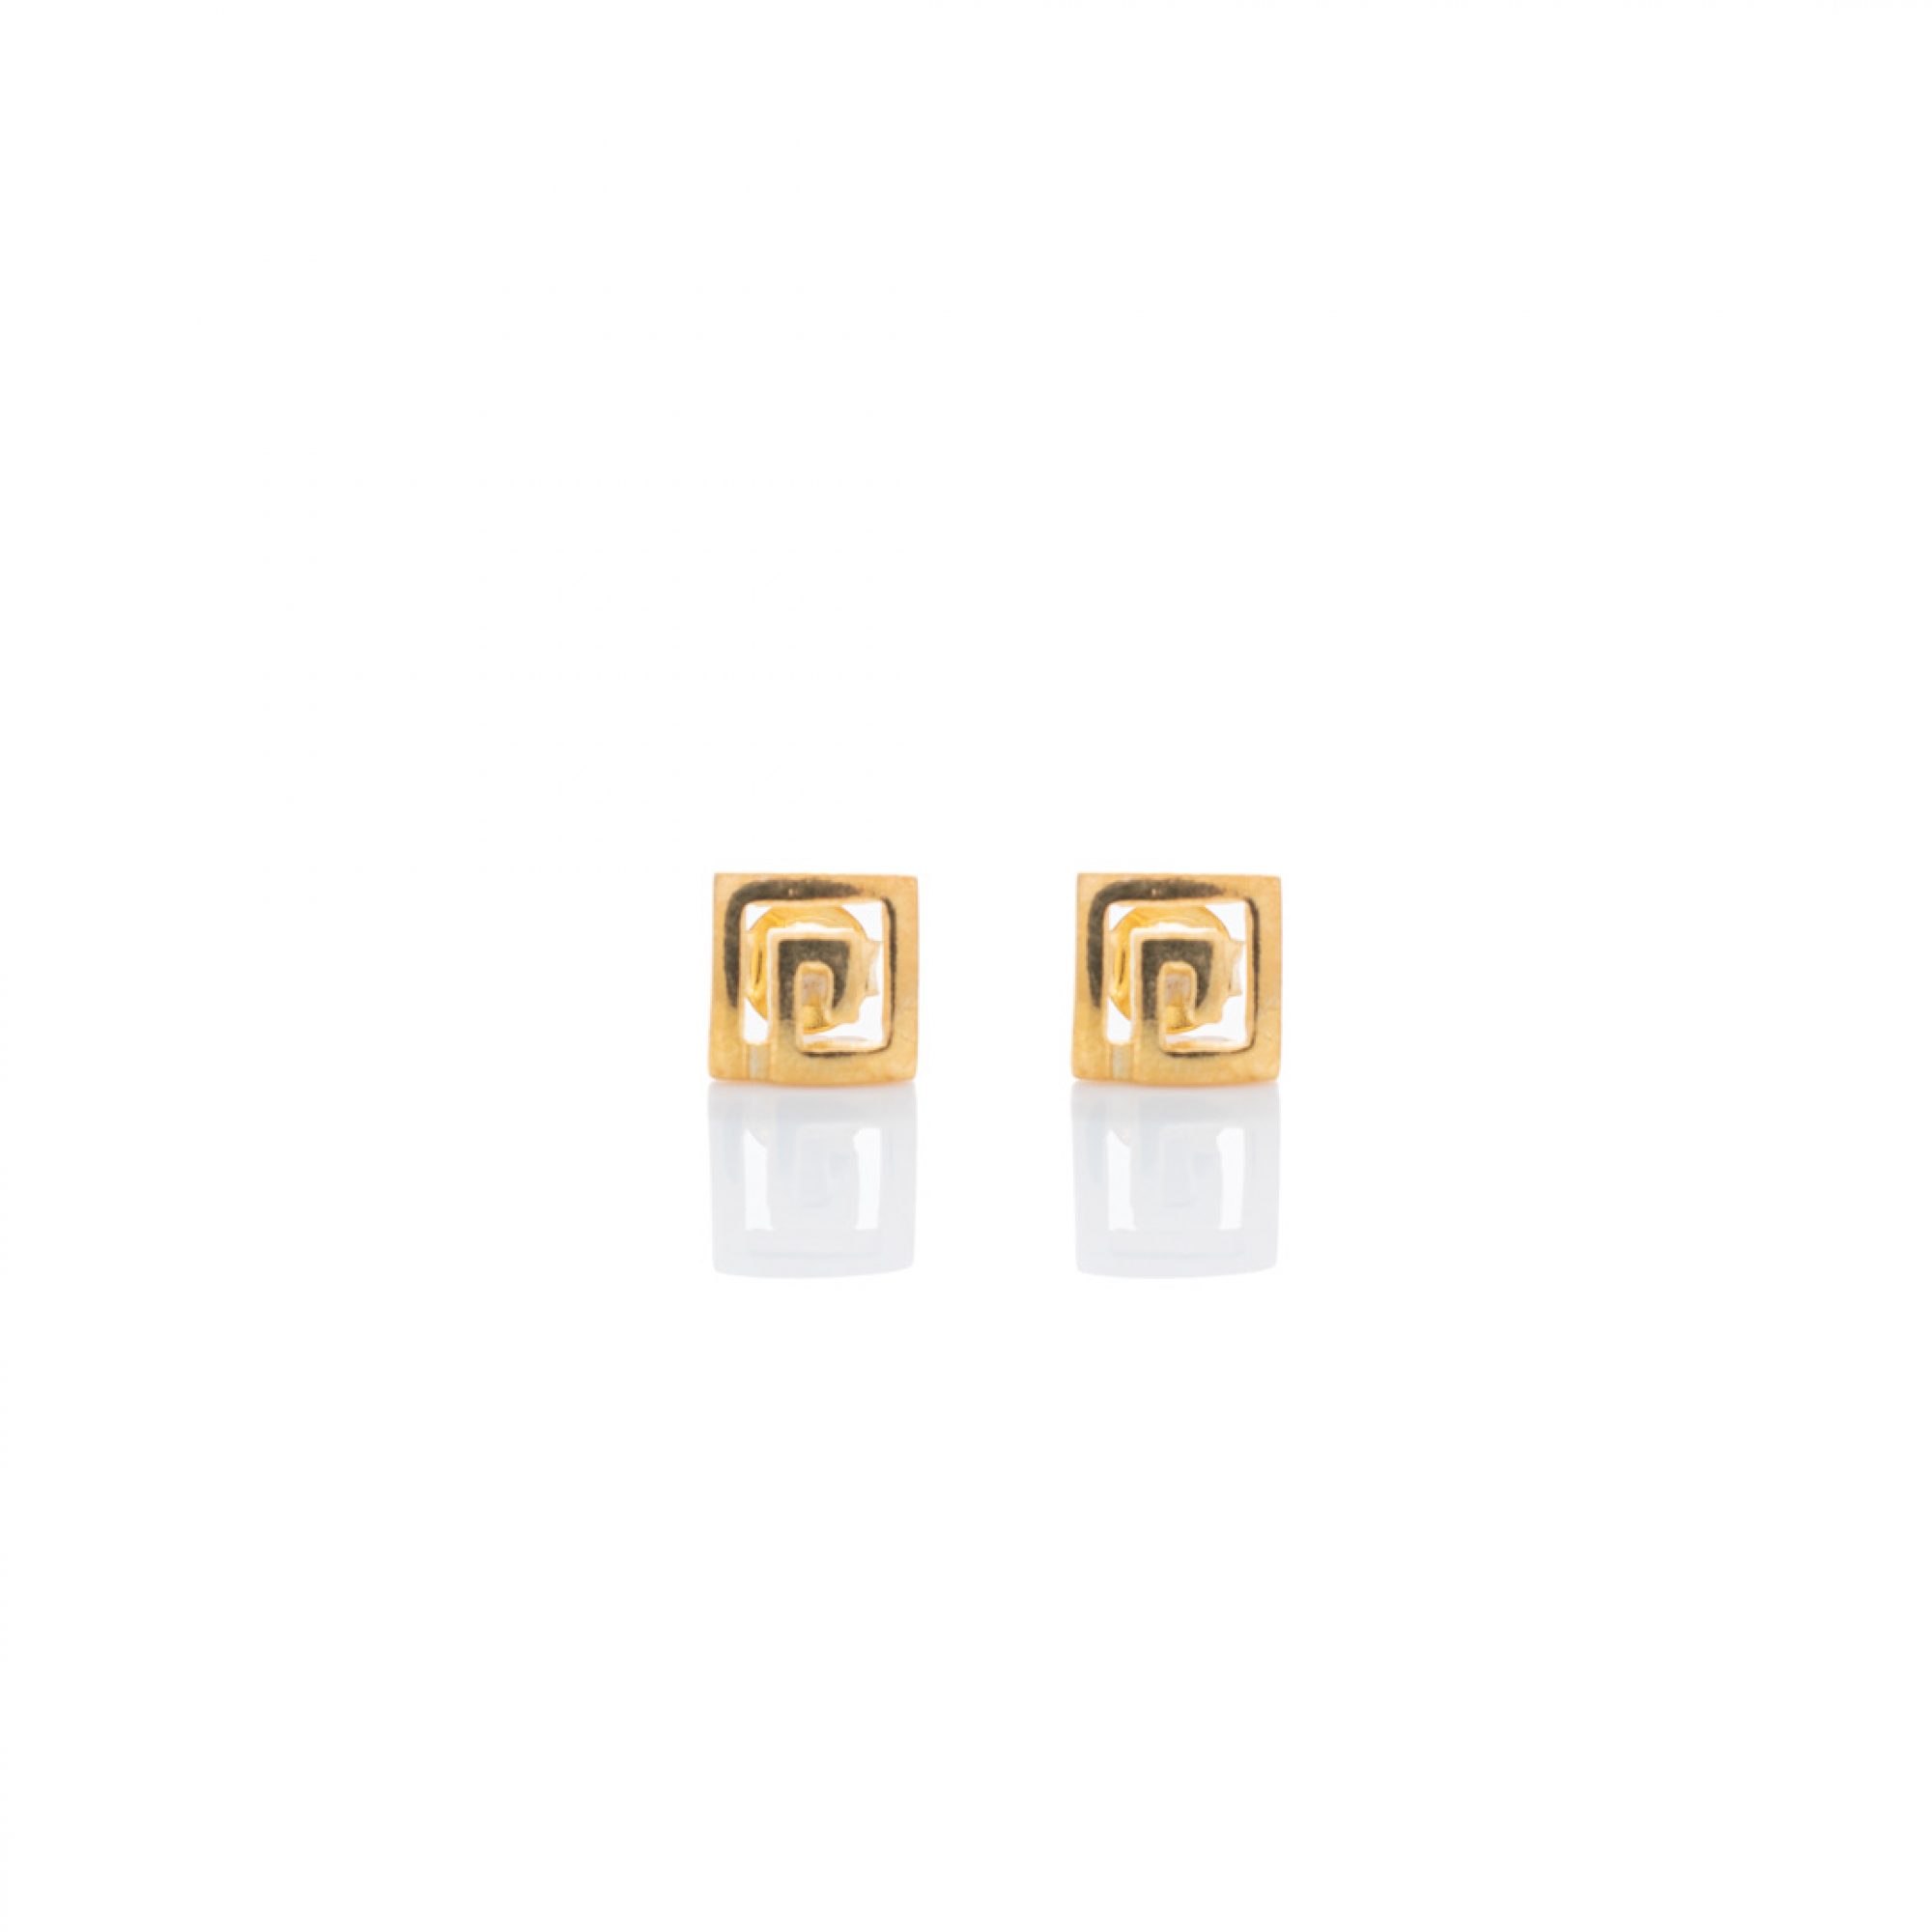 Gold plated meander earrings